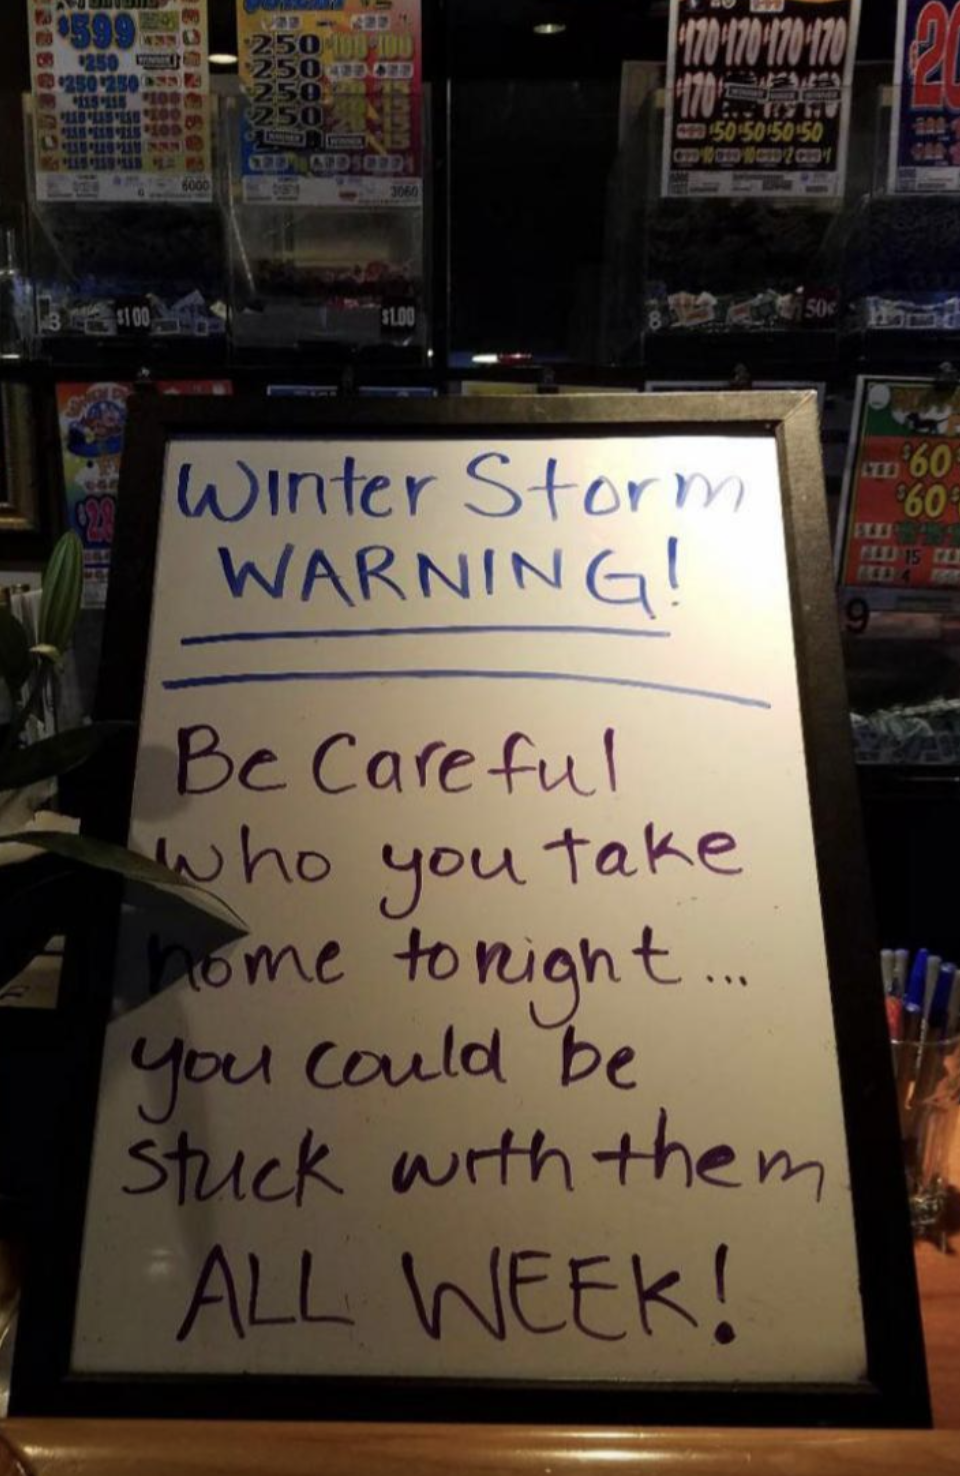 funny winter storm warning meme - 599 250 250 170170170170 50505050 Winter Storm. Warning! Be Careful who you take home to right... you could be Stuck with them All Week! 60 60